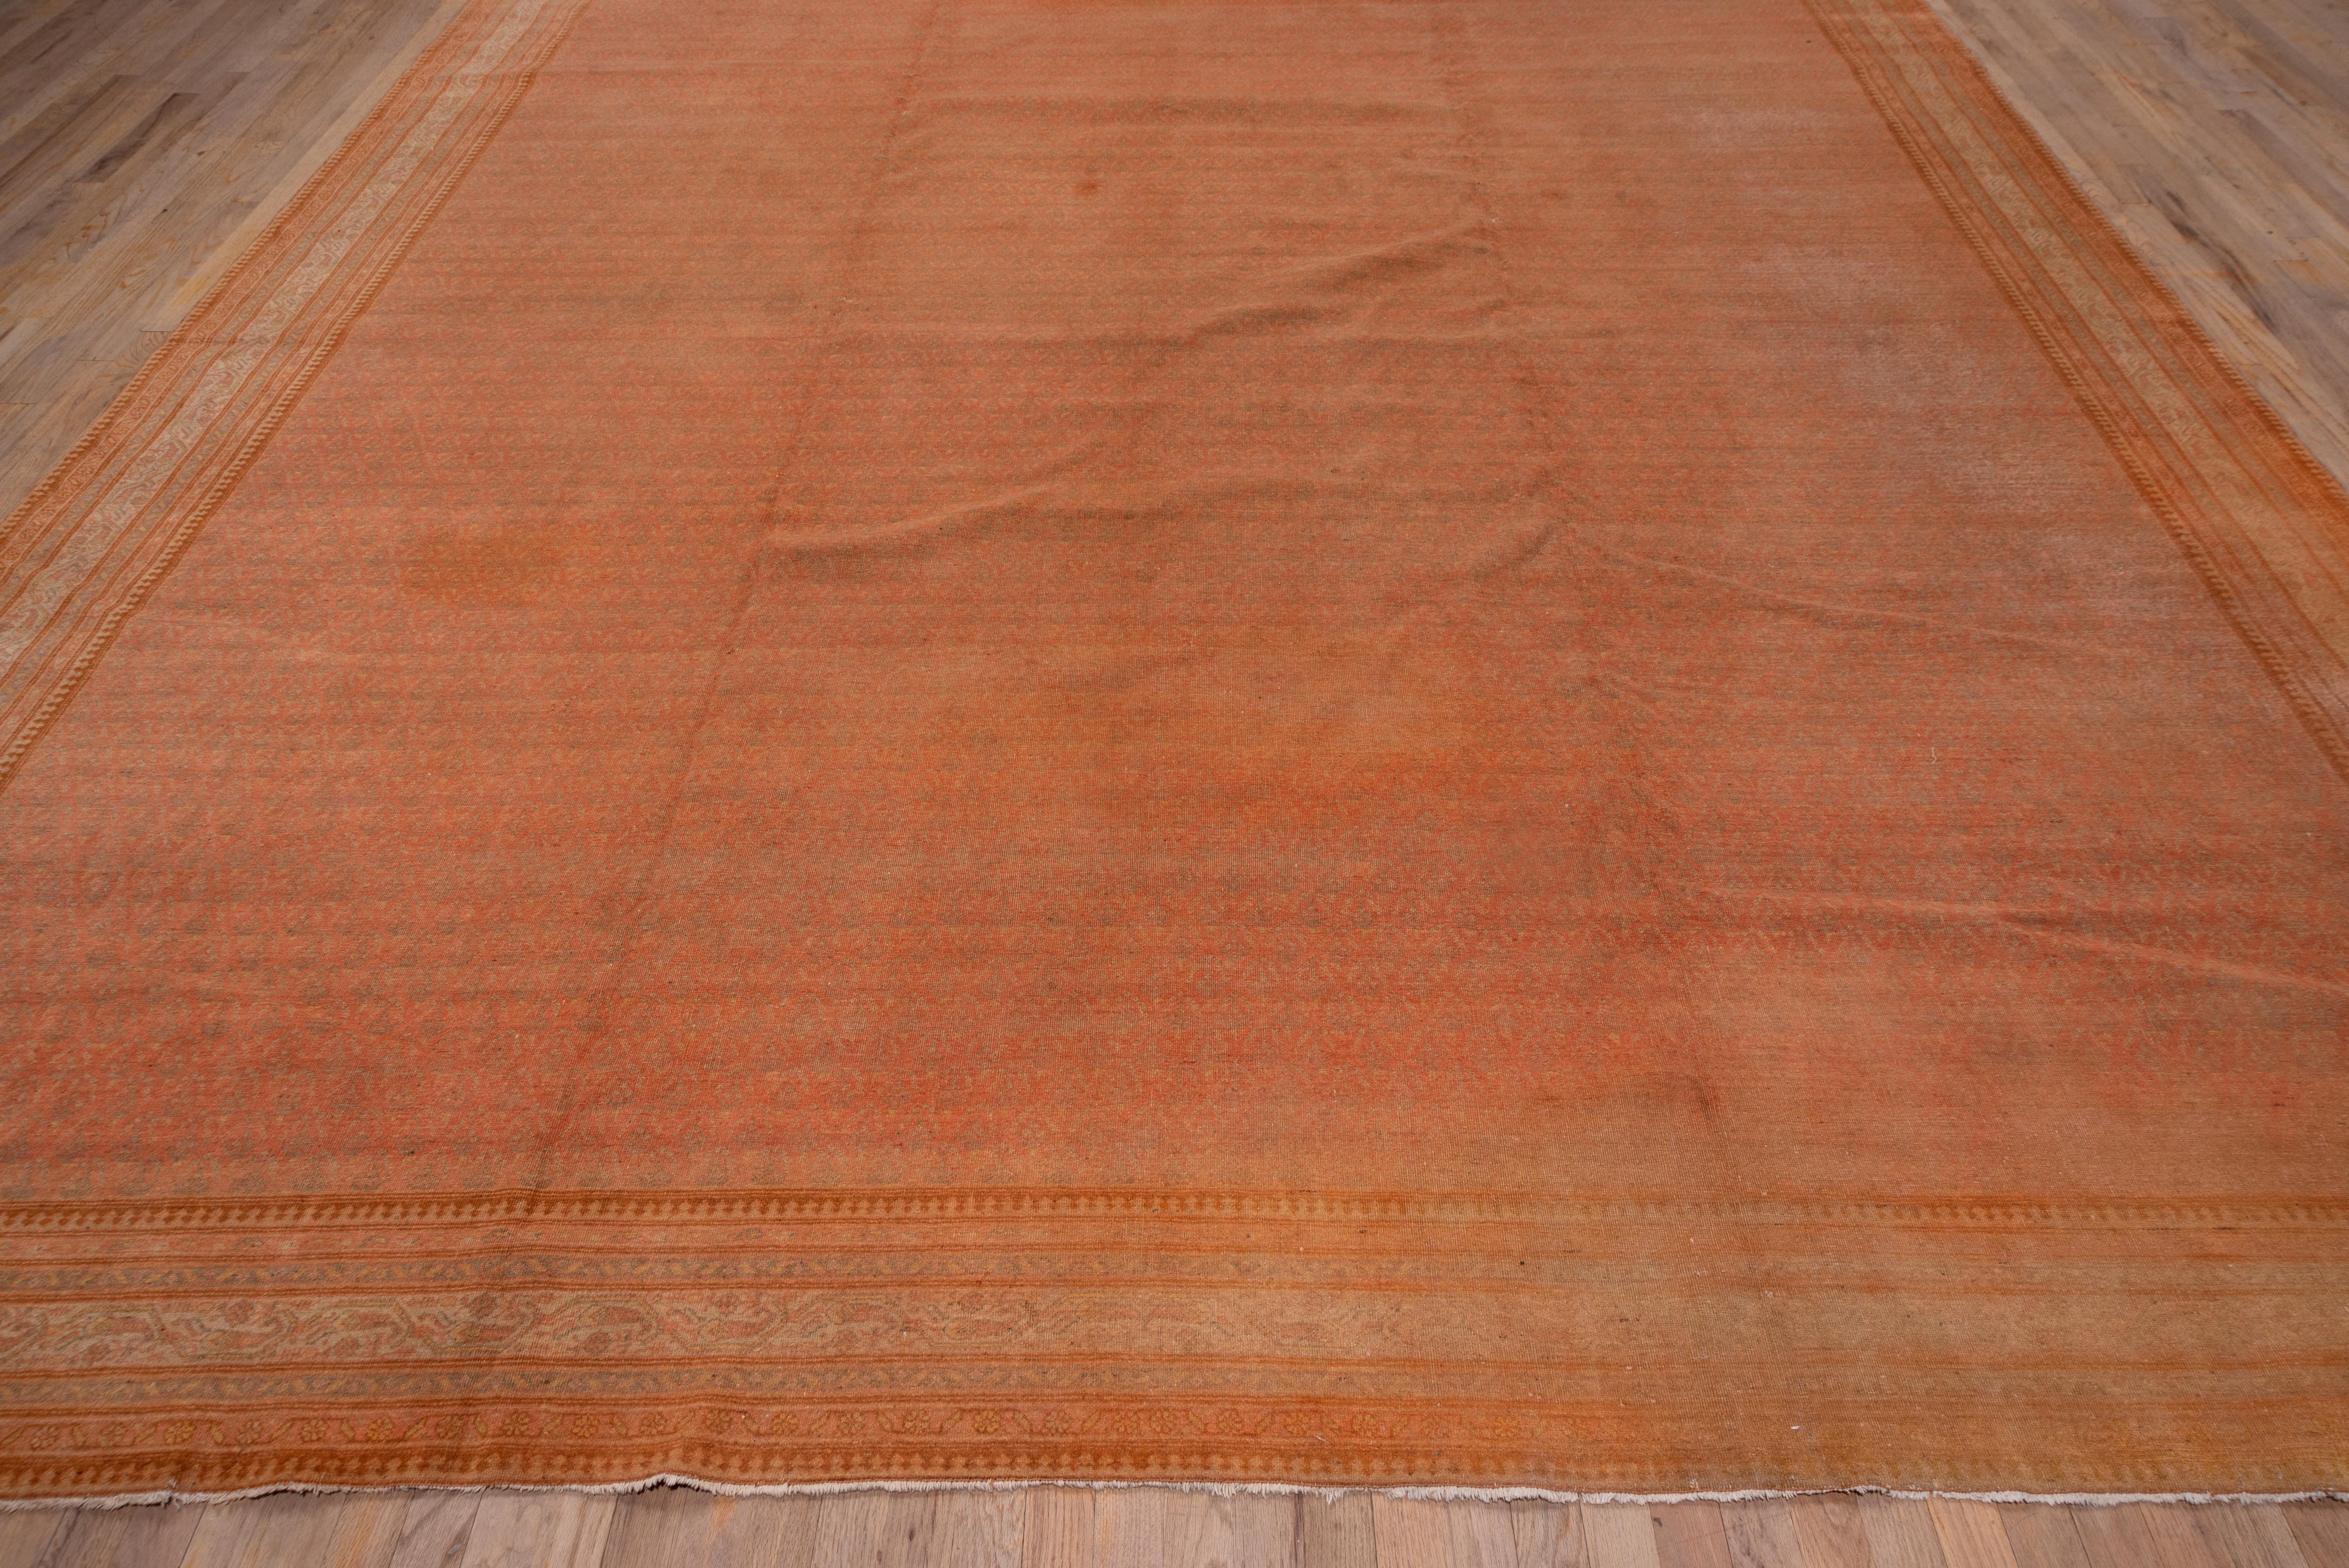 This generally warm and golden toned, softly colored northern Indian well-woven urban carpet shows a pattern of small, leftward facing floriated botehs on a burnt apricot-rust field, set within seven narrow borders of which the central band in sand